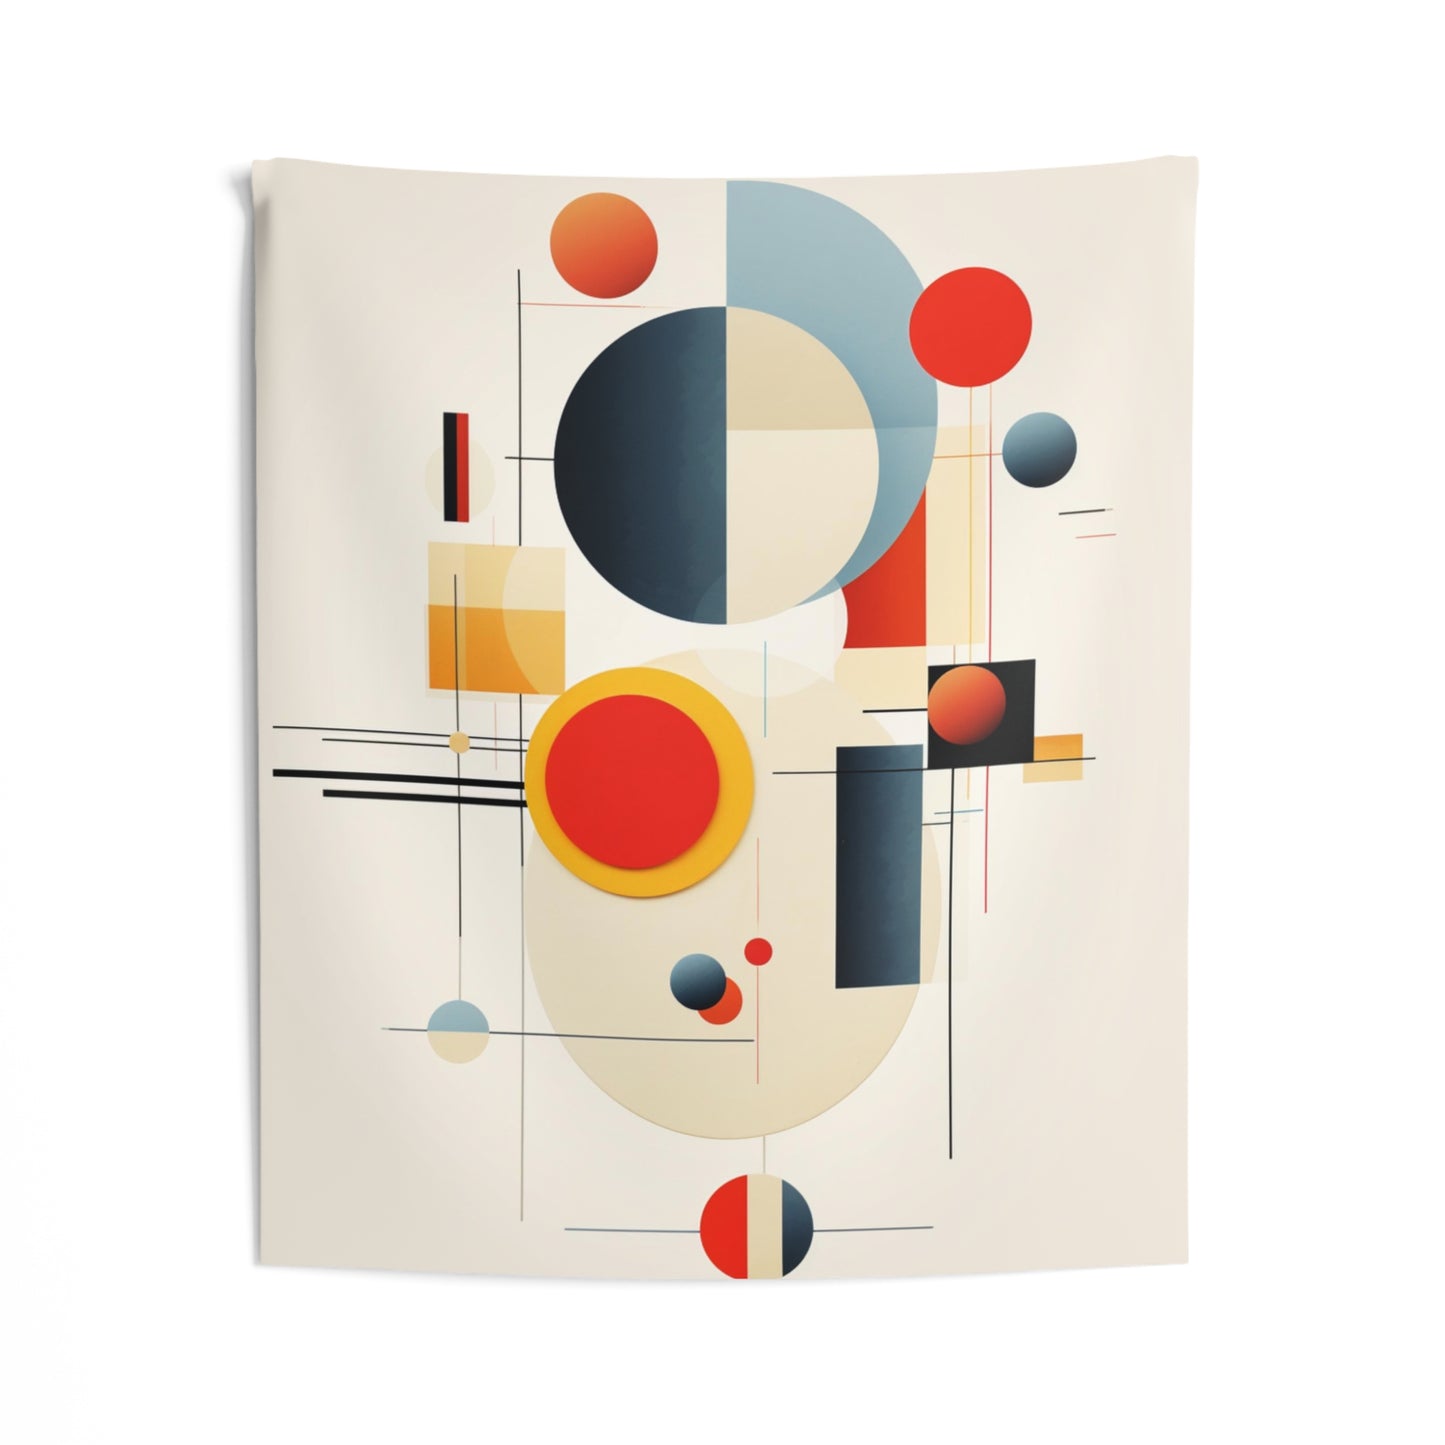 Bauhaus Tapestry, Geometric Abstract Wall Art Hanging Cool Unique Vertical Aesthetic Large Small Decor Bedroom College Dorm Room Starcove Fashion